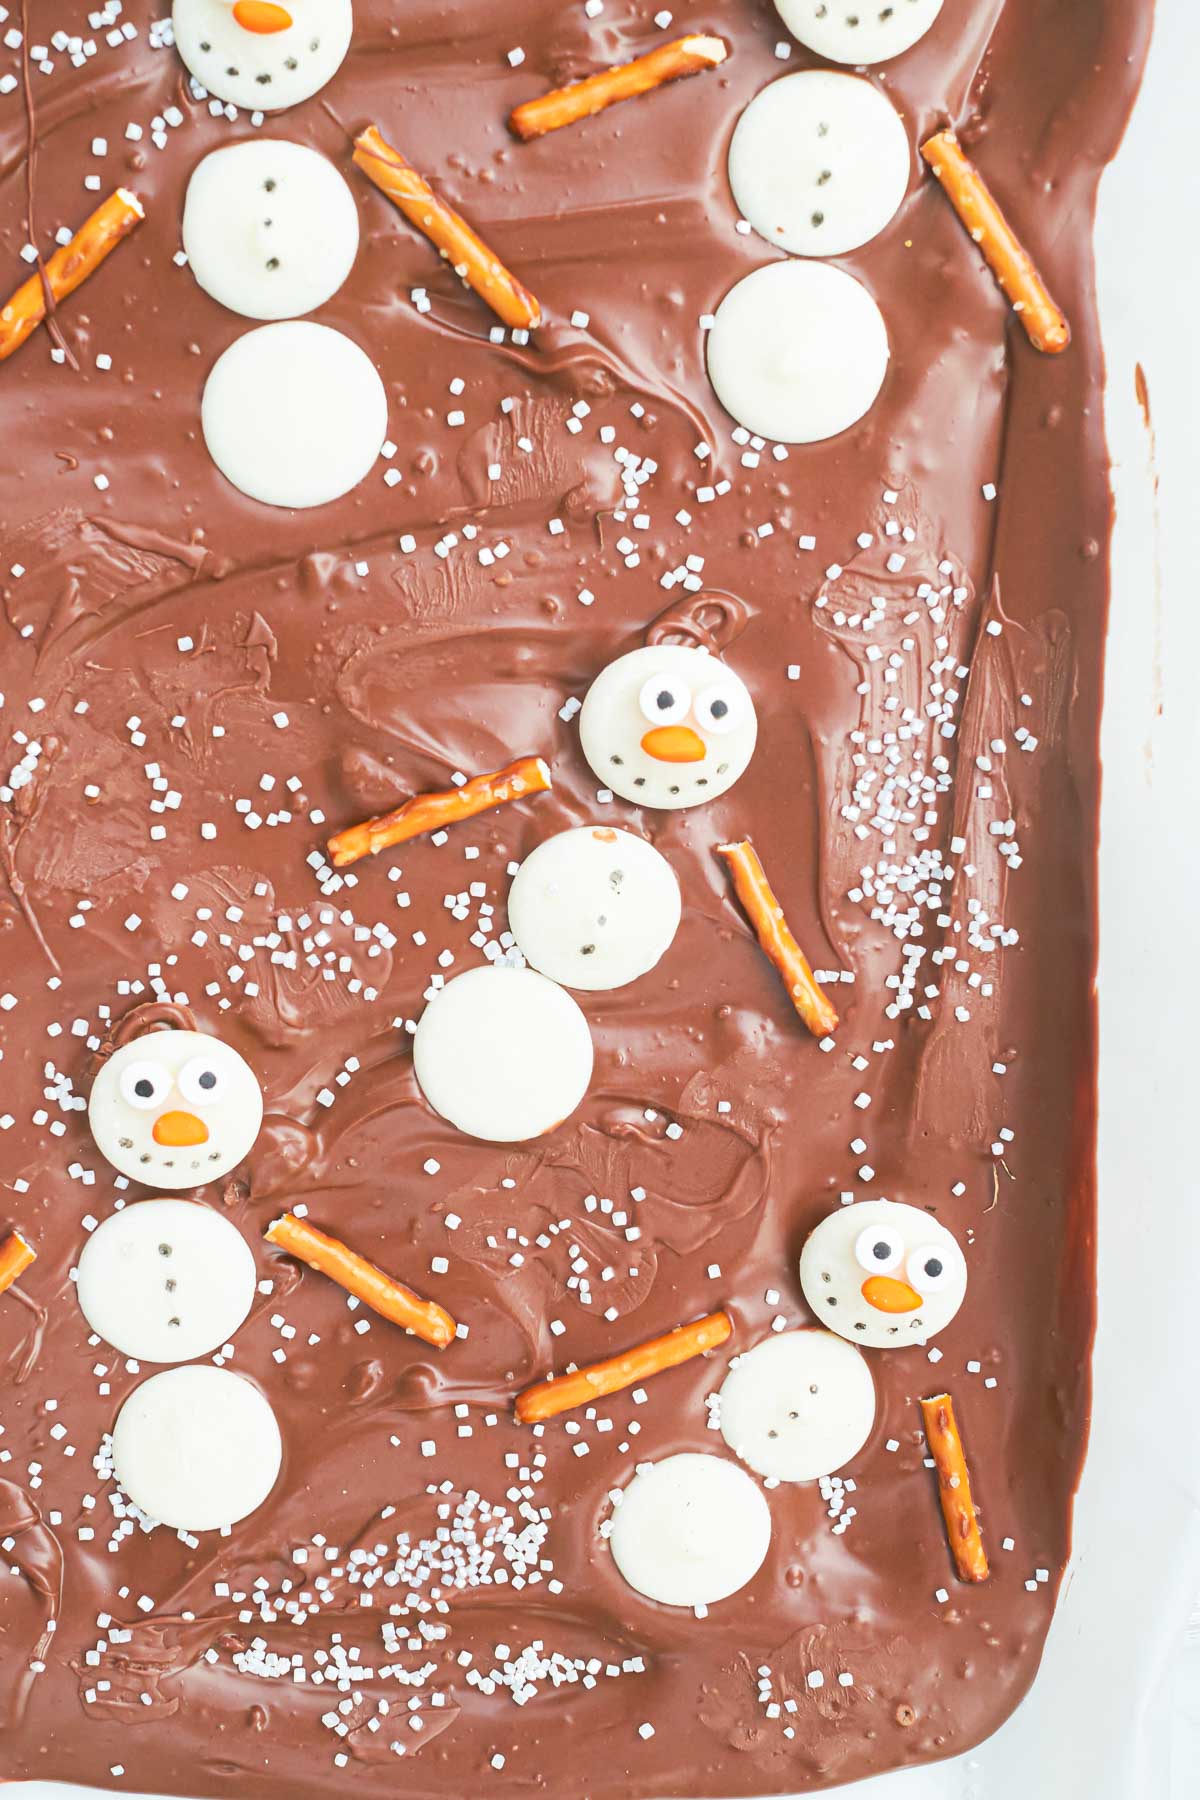 close up view of the completed melted snowman chocolate bark